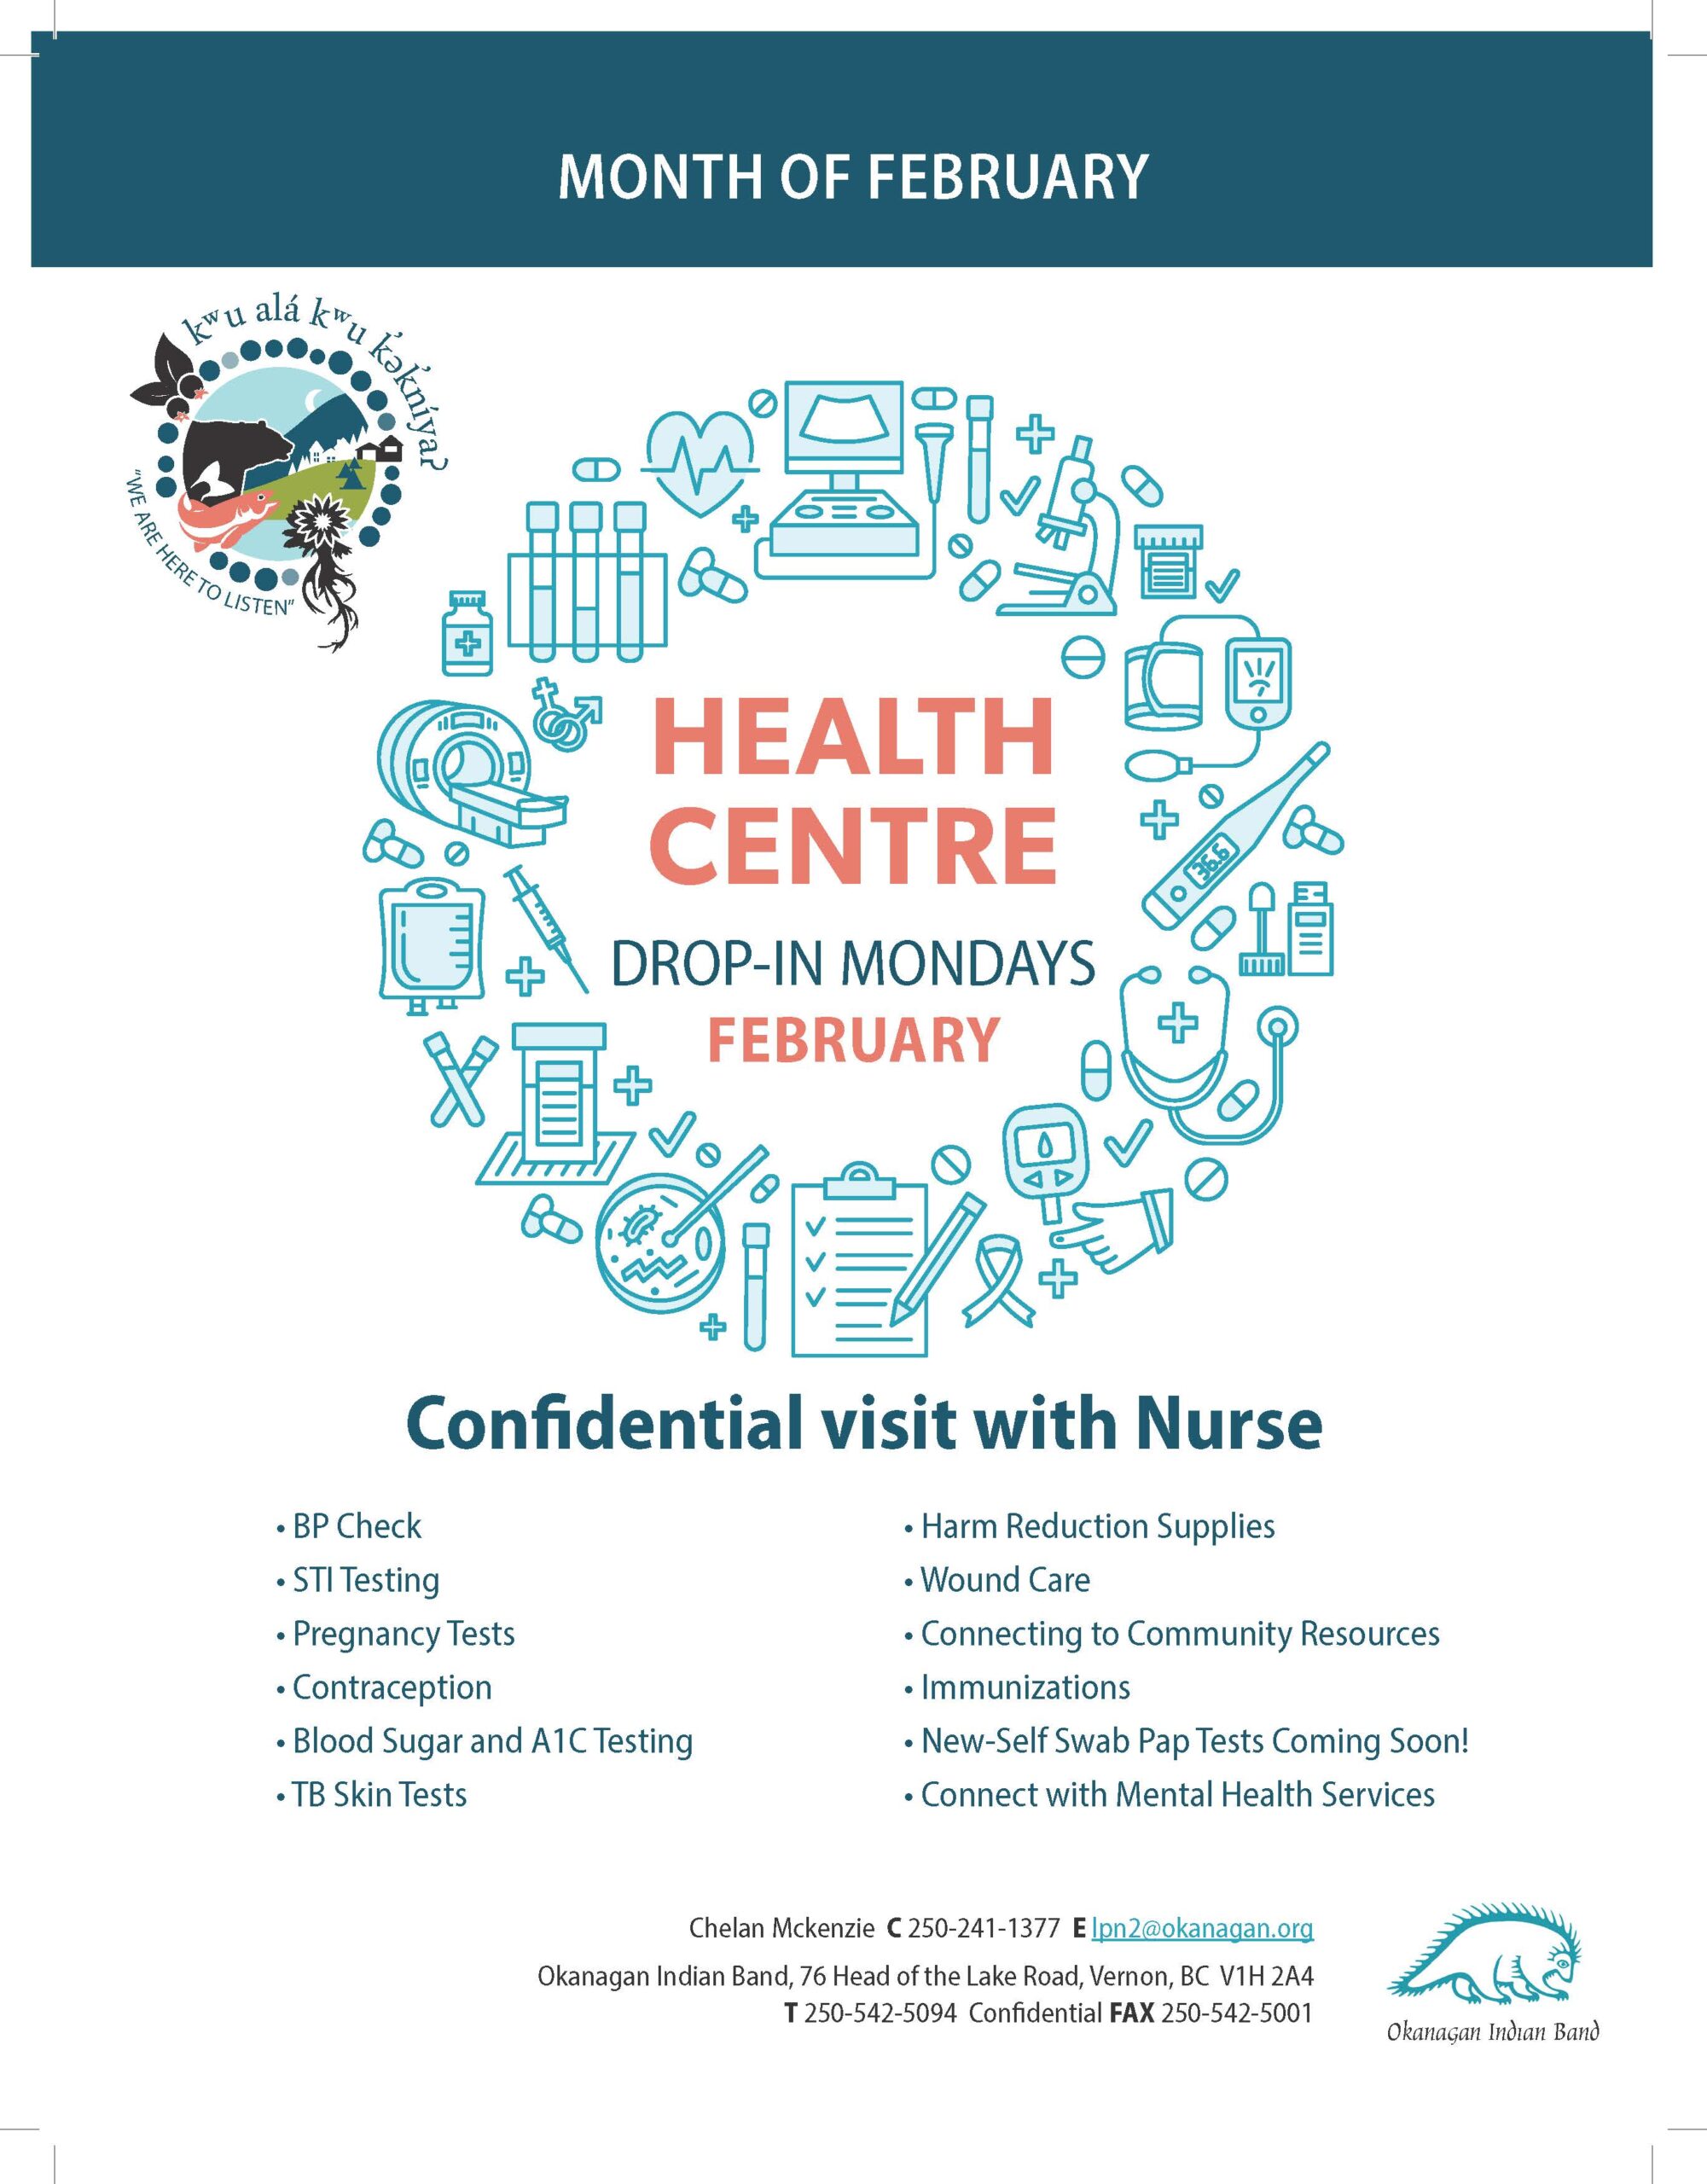 Health Center drop in Mondays (February)